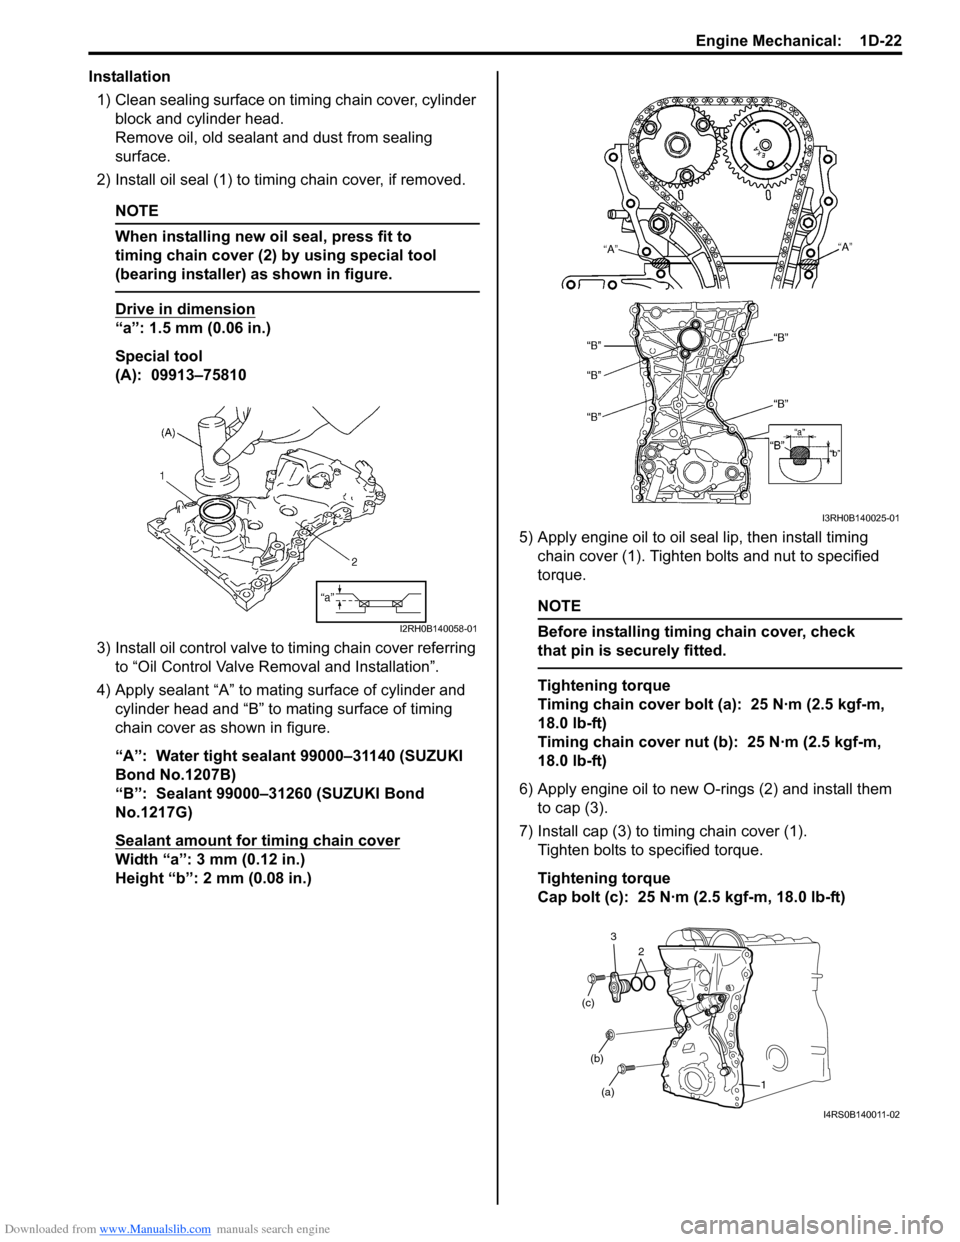 SUZUKI SWIFT 2008 2.G Service Workshop Manual Downloaded from www.Manualslib.com manuals search engine Engine Mechanical:  1D-22
Installation1) Clean sealing surface on timing chain cover, cylinder  block and cylinder head.
Remove oil, old sealan